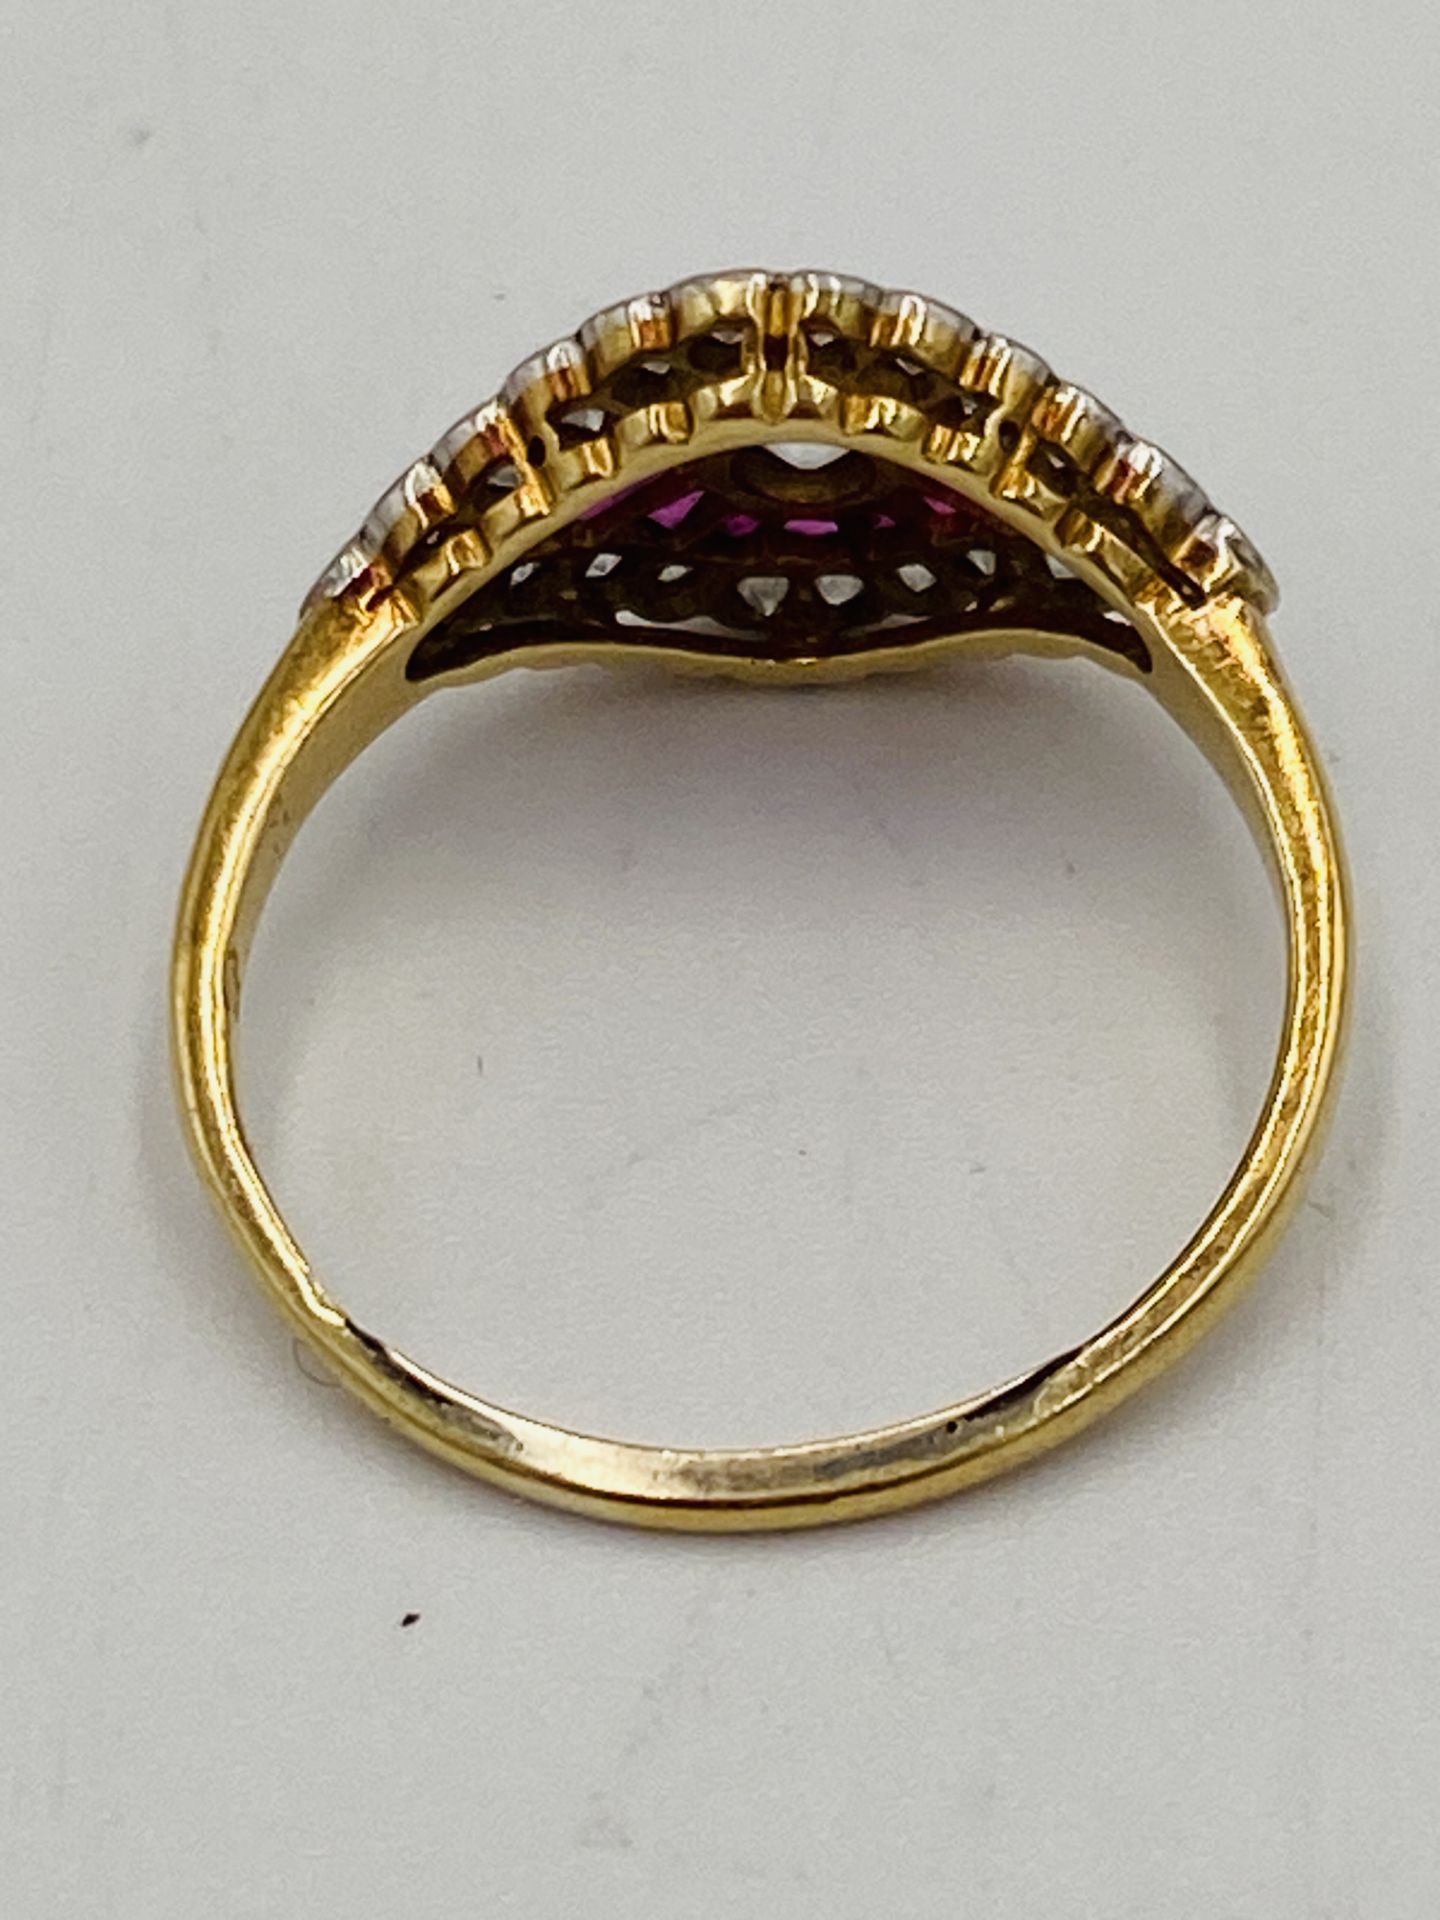 18ct gold ring set with central diamond - Image 6 of 6